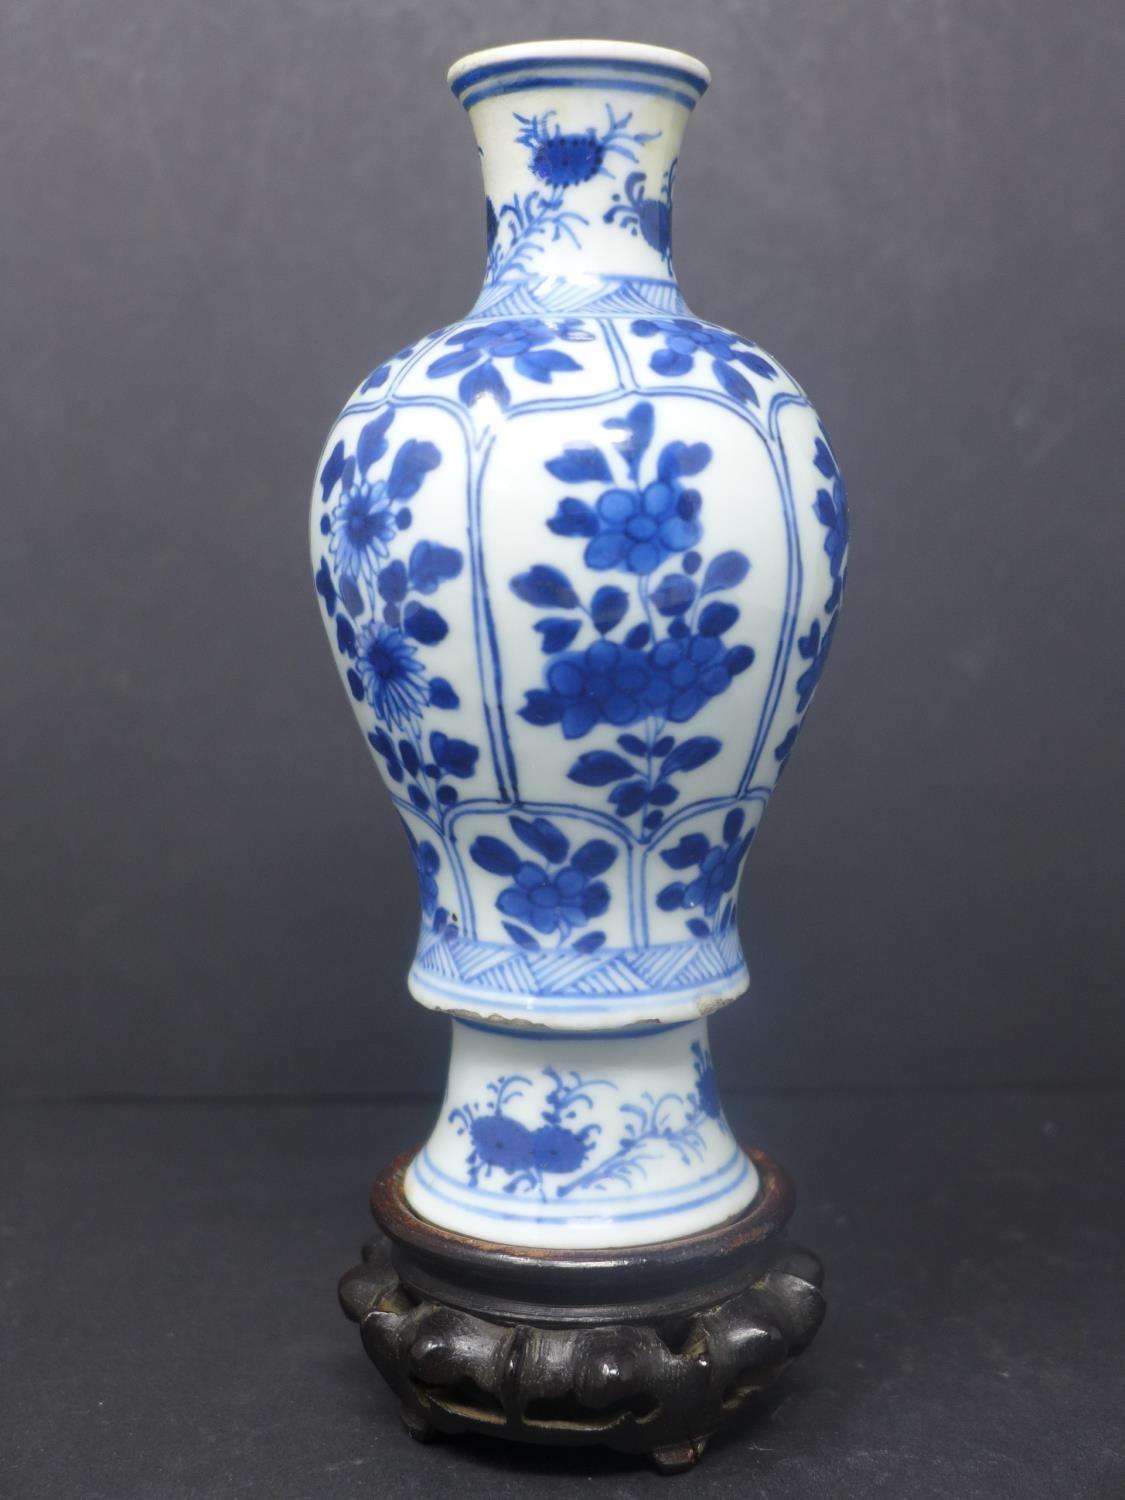 A Chinese baluster vase, blue and white porcelain, floral design probably K?ang Hsi period with